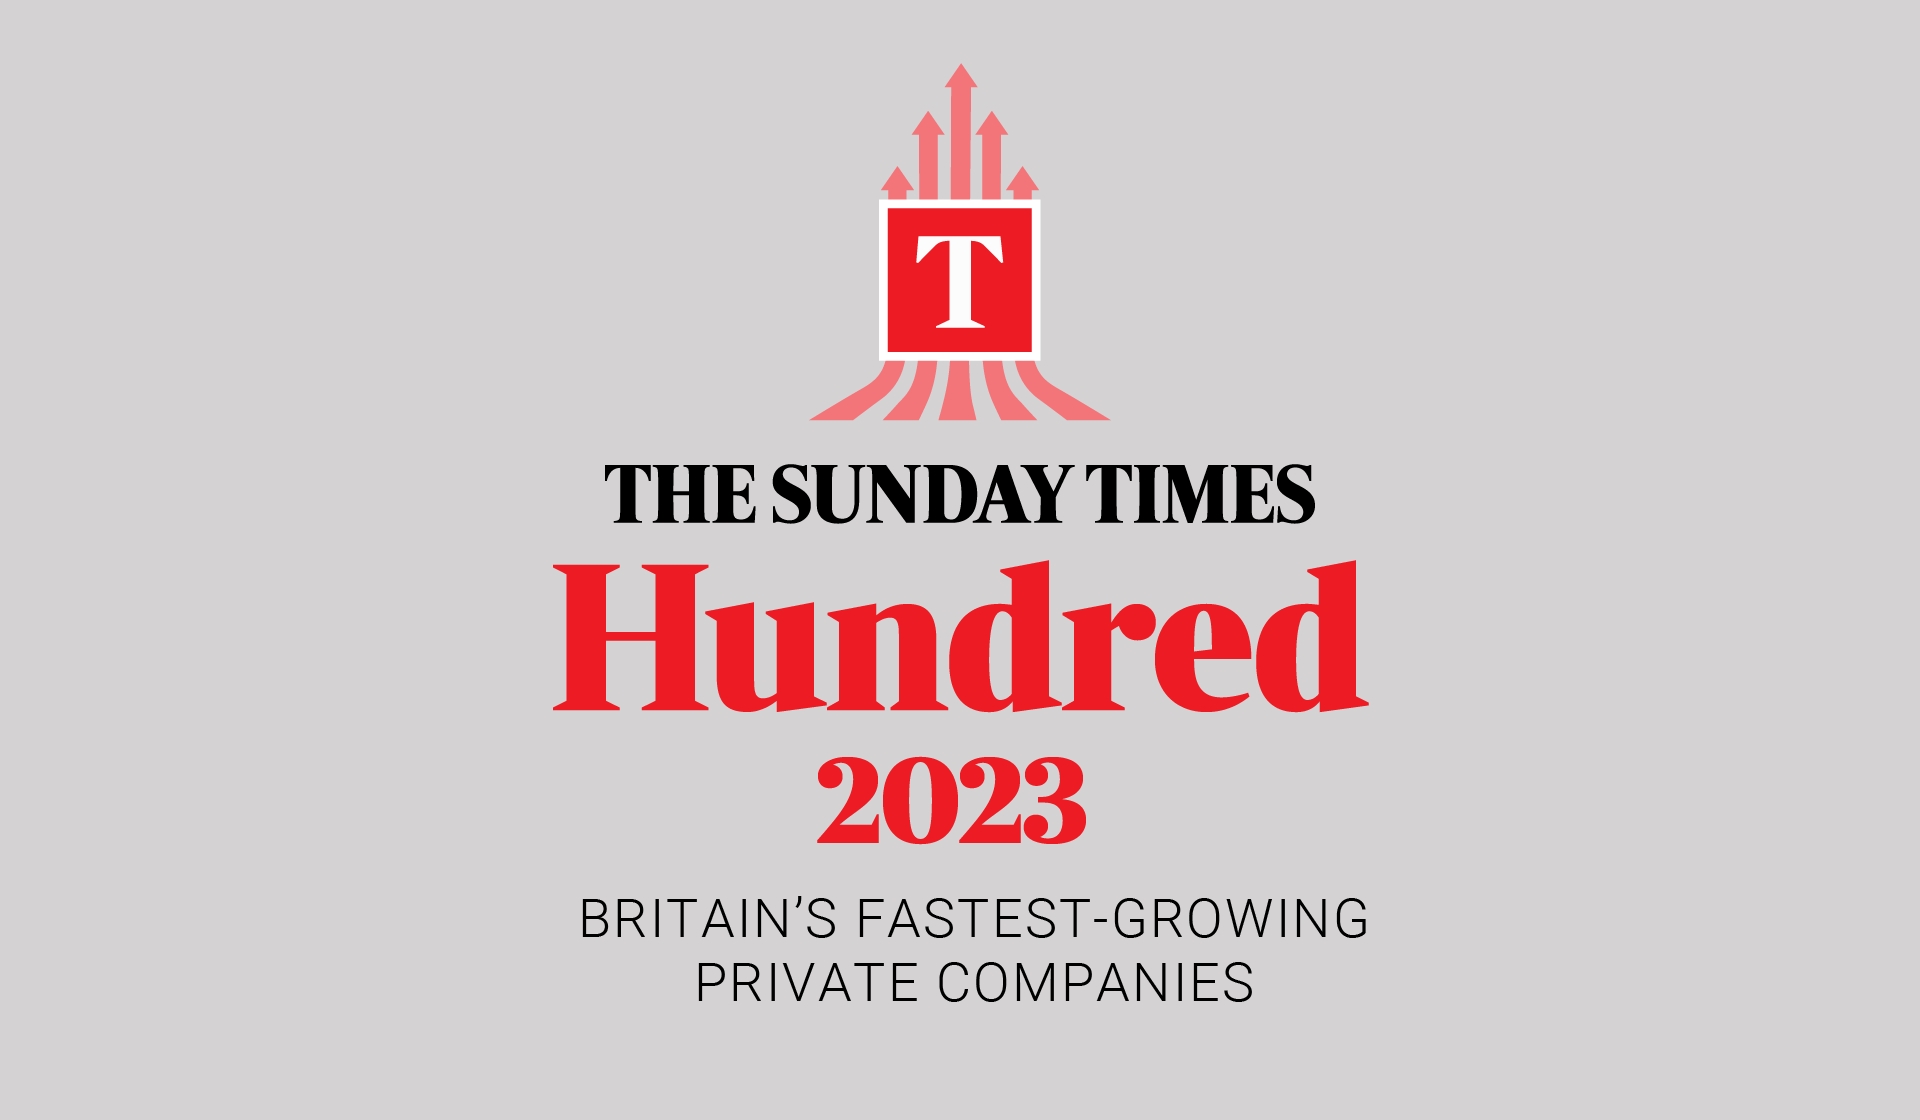 Bishopsgate Corporate Finance ranked 29th on The Sunday Times 100